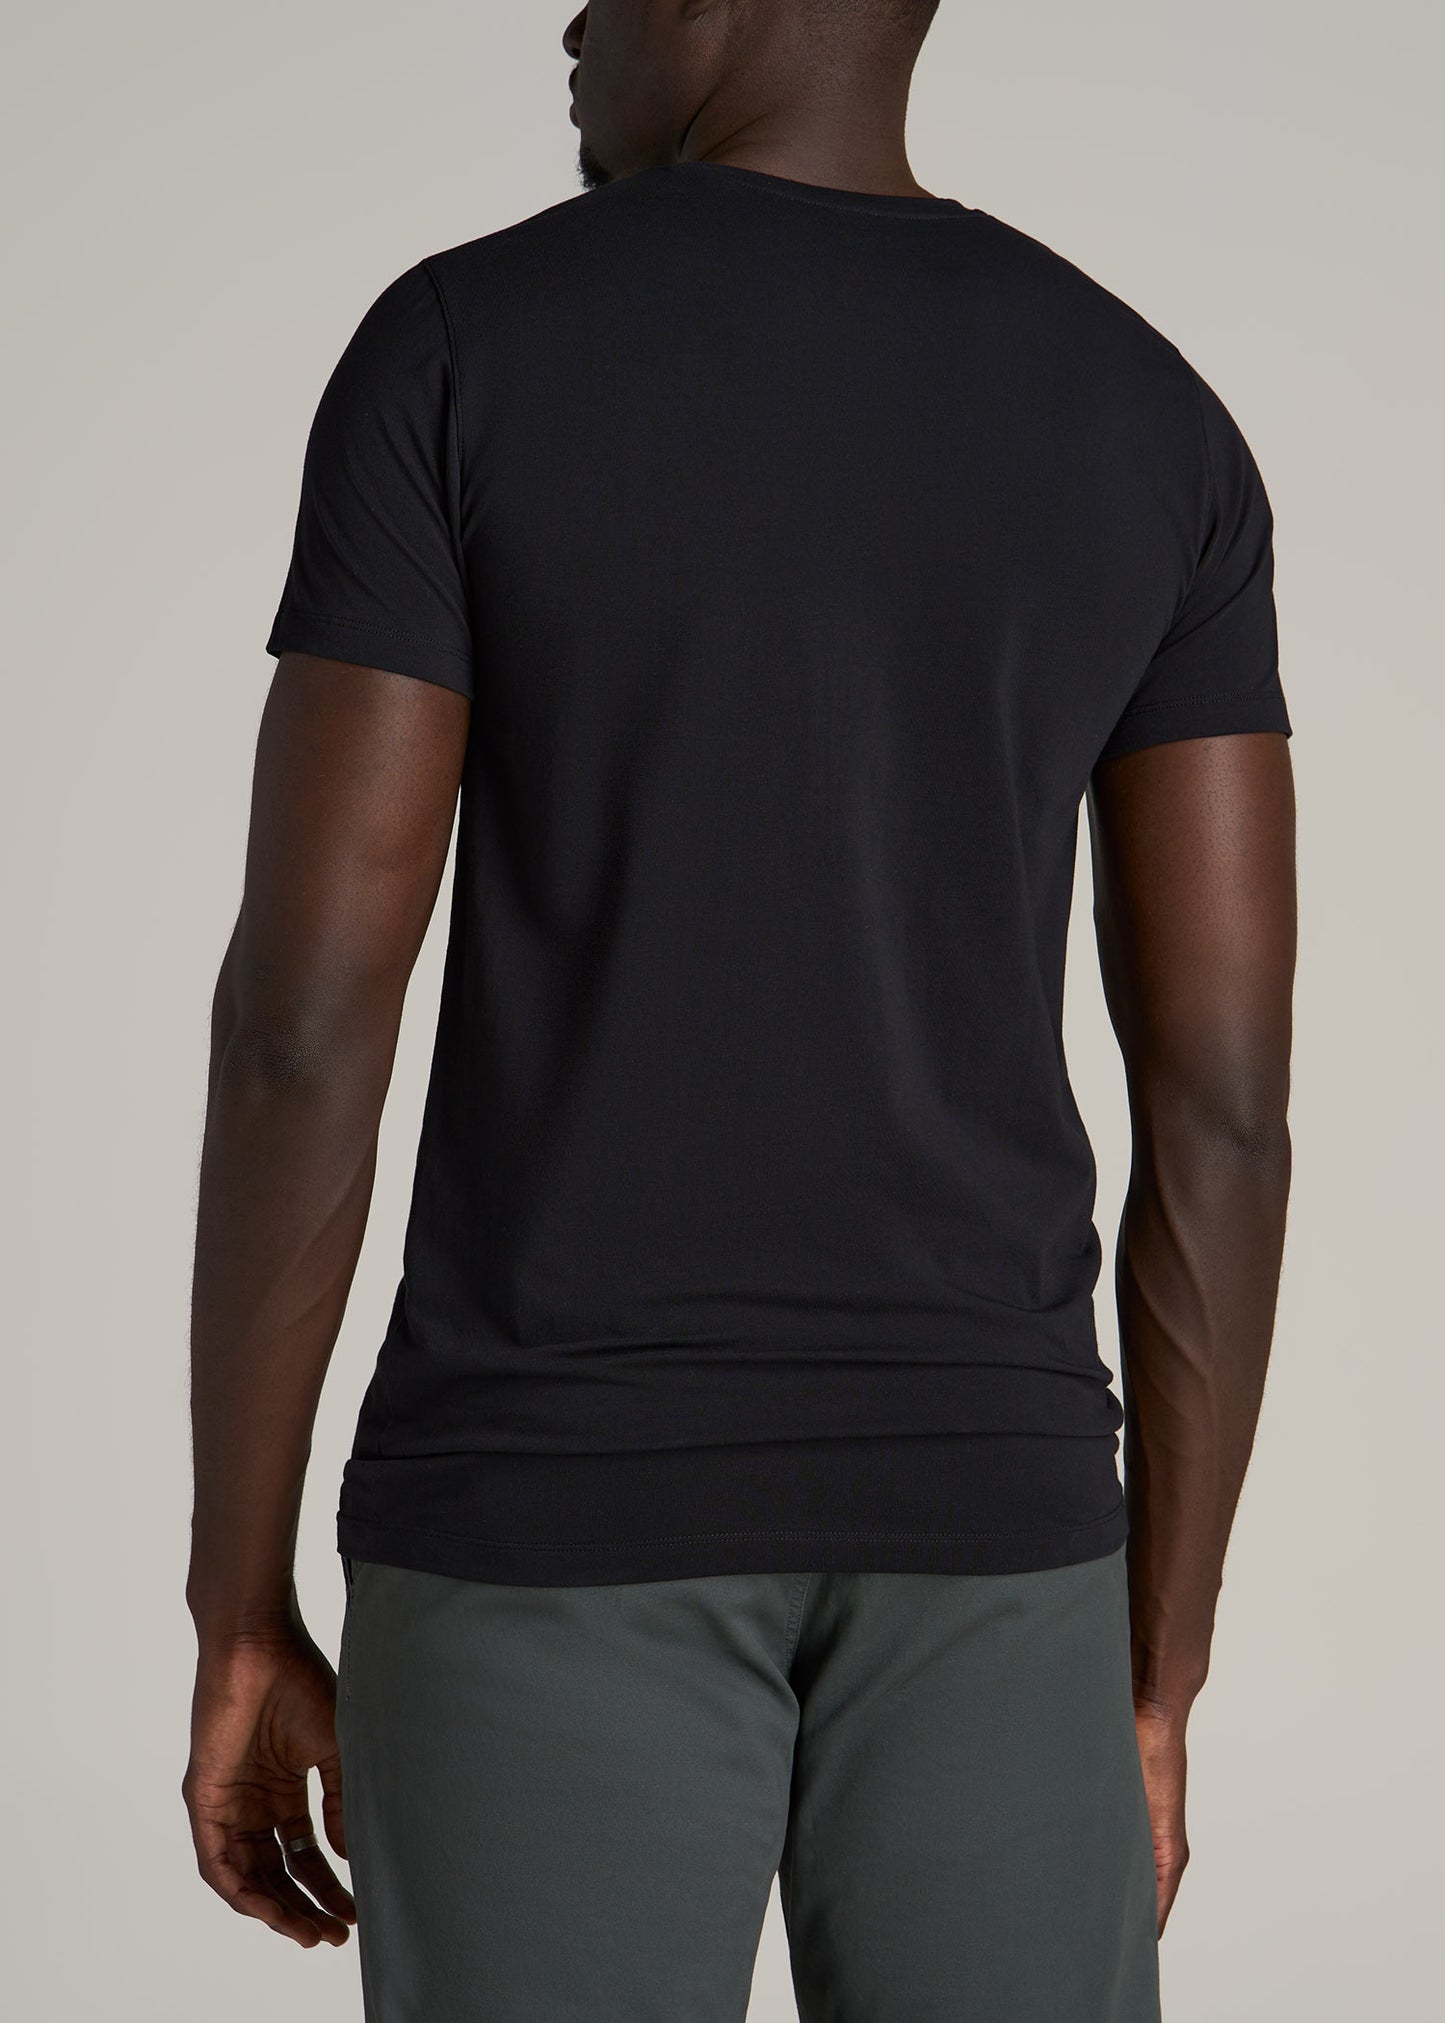 Stretch Cotton MODERN-FIT T-Shirt for Tall Men in Black